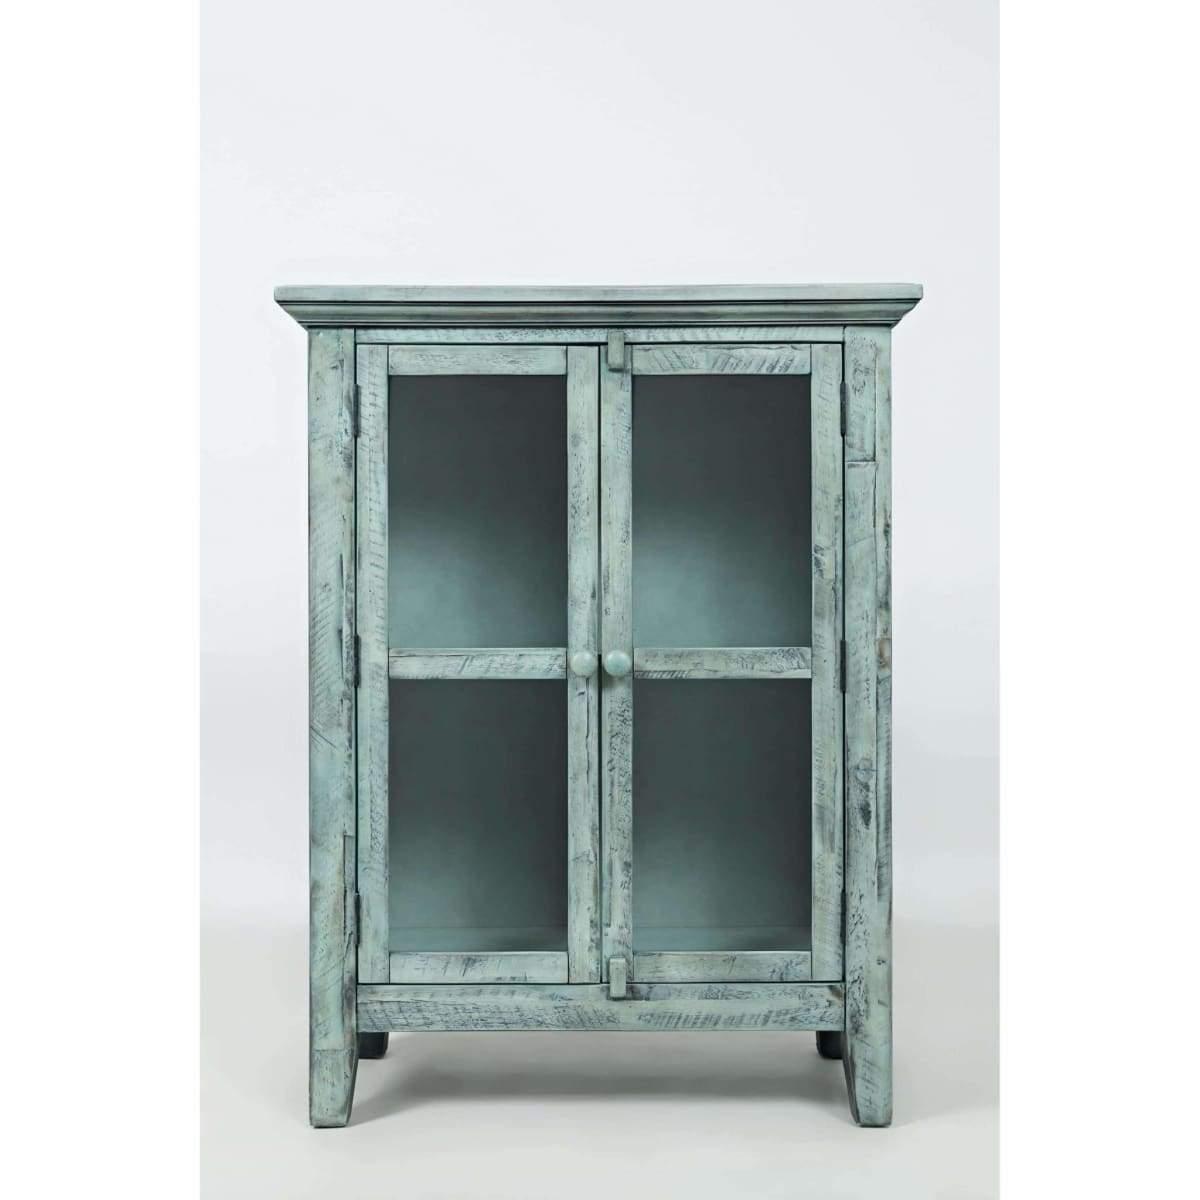 Rustic Shores 32 Surfside Accent Cabinet - accent cabinet